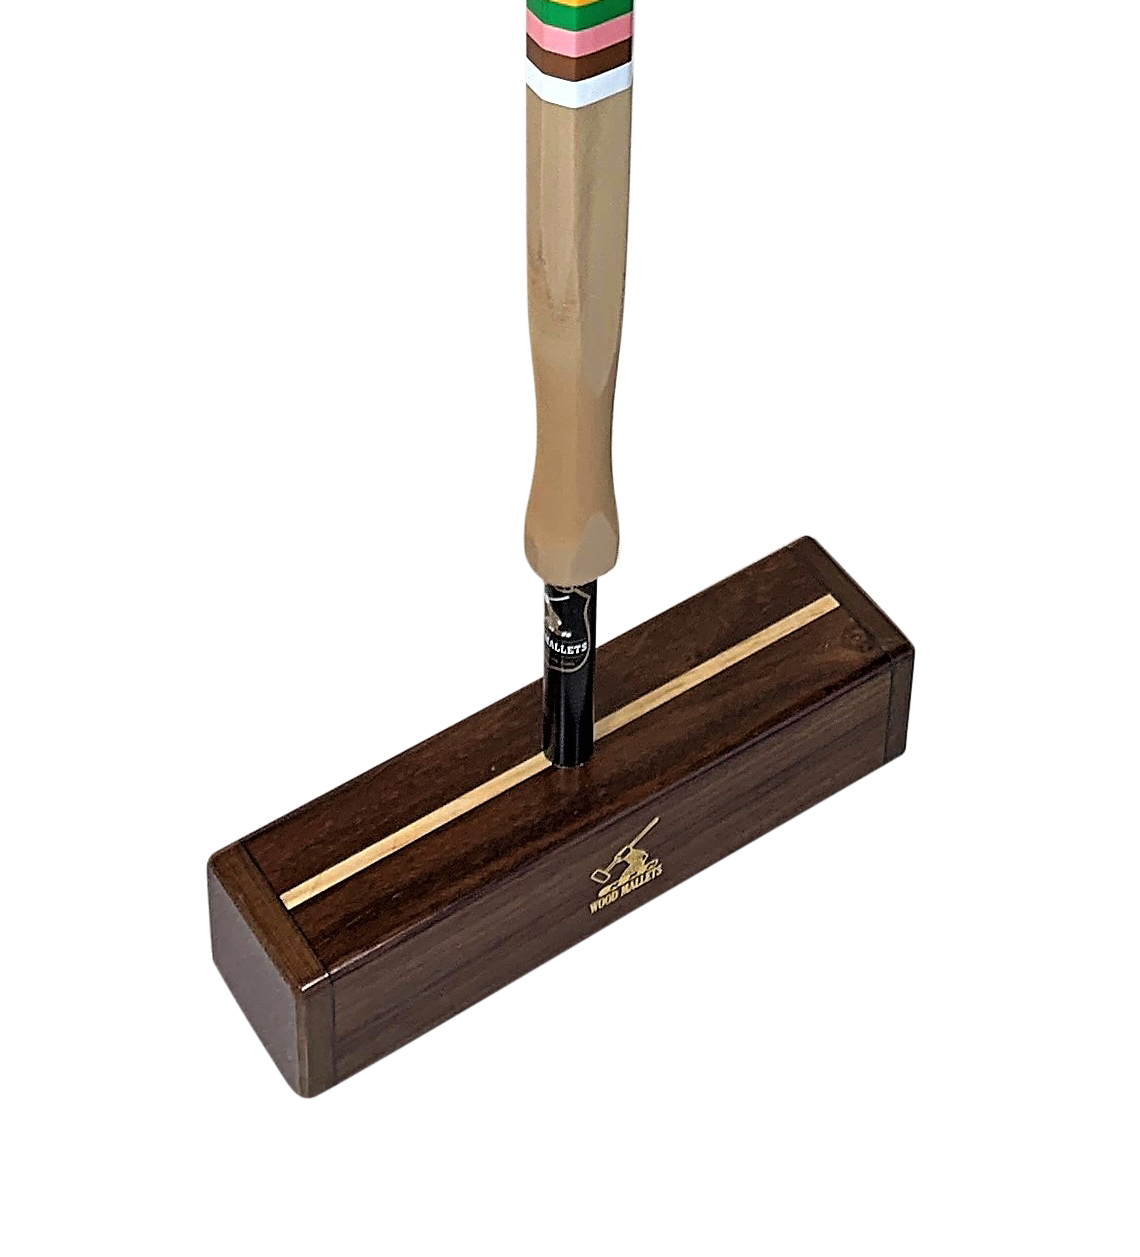 Discovery Croquet Mallet